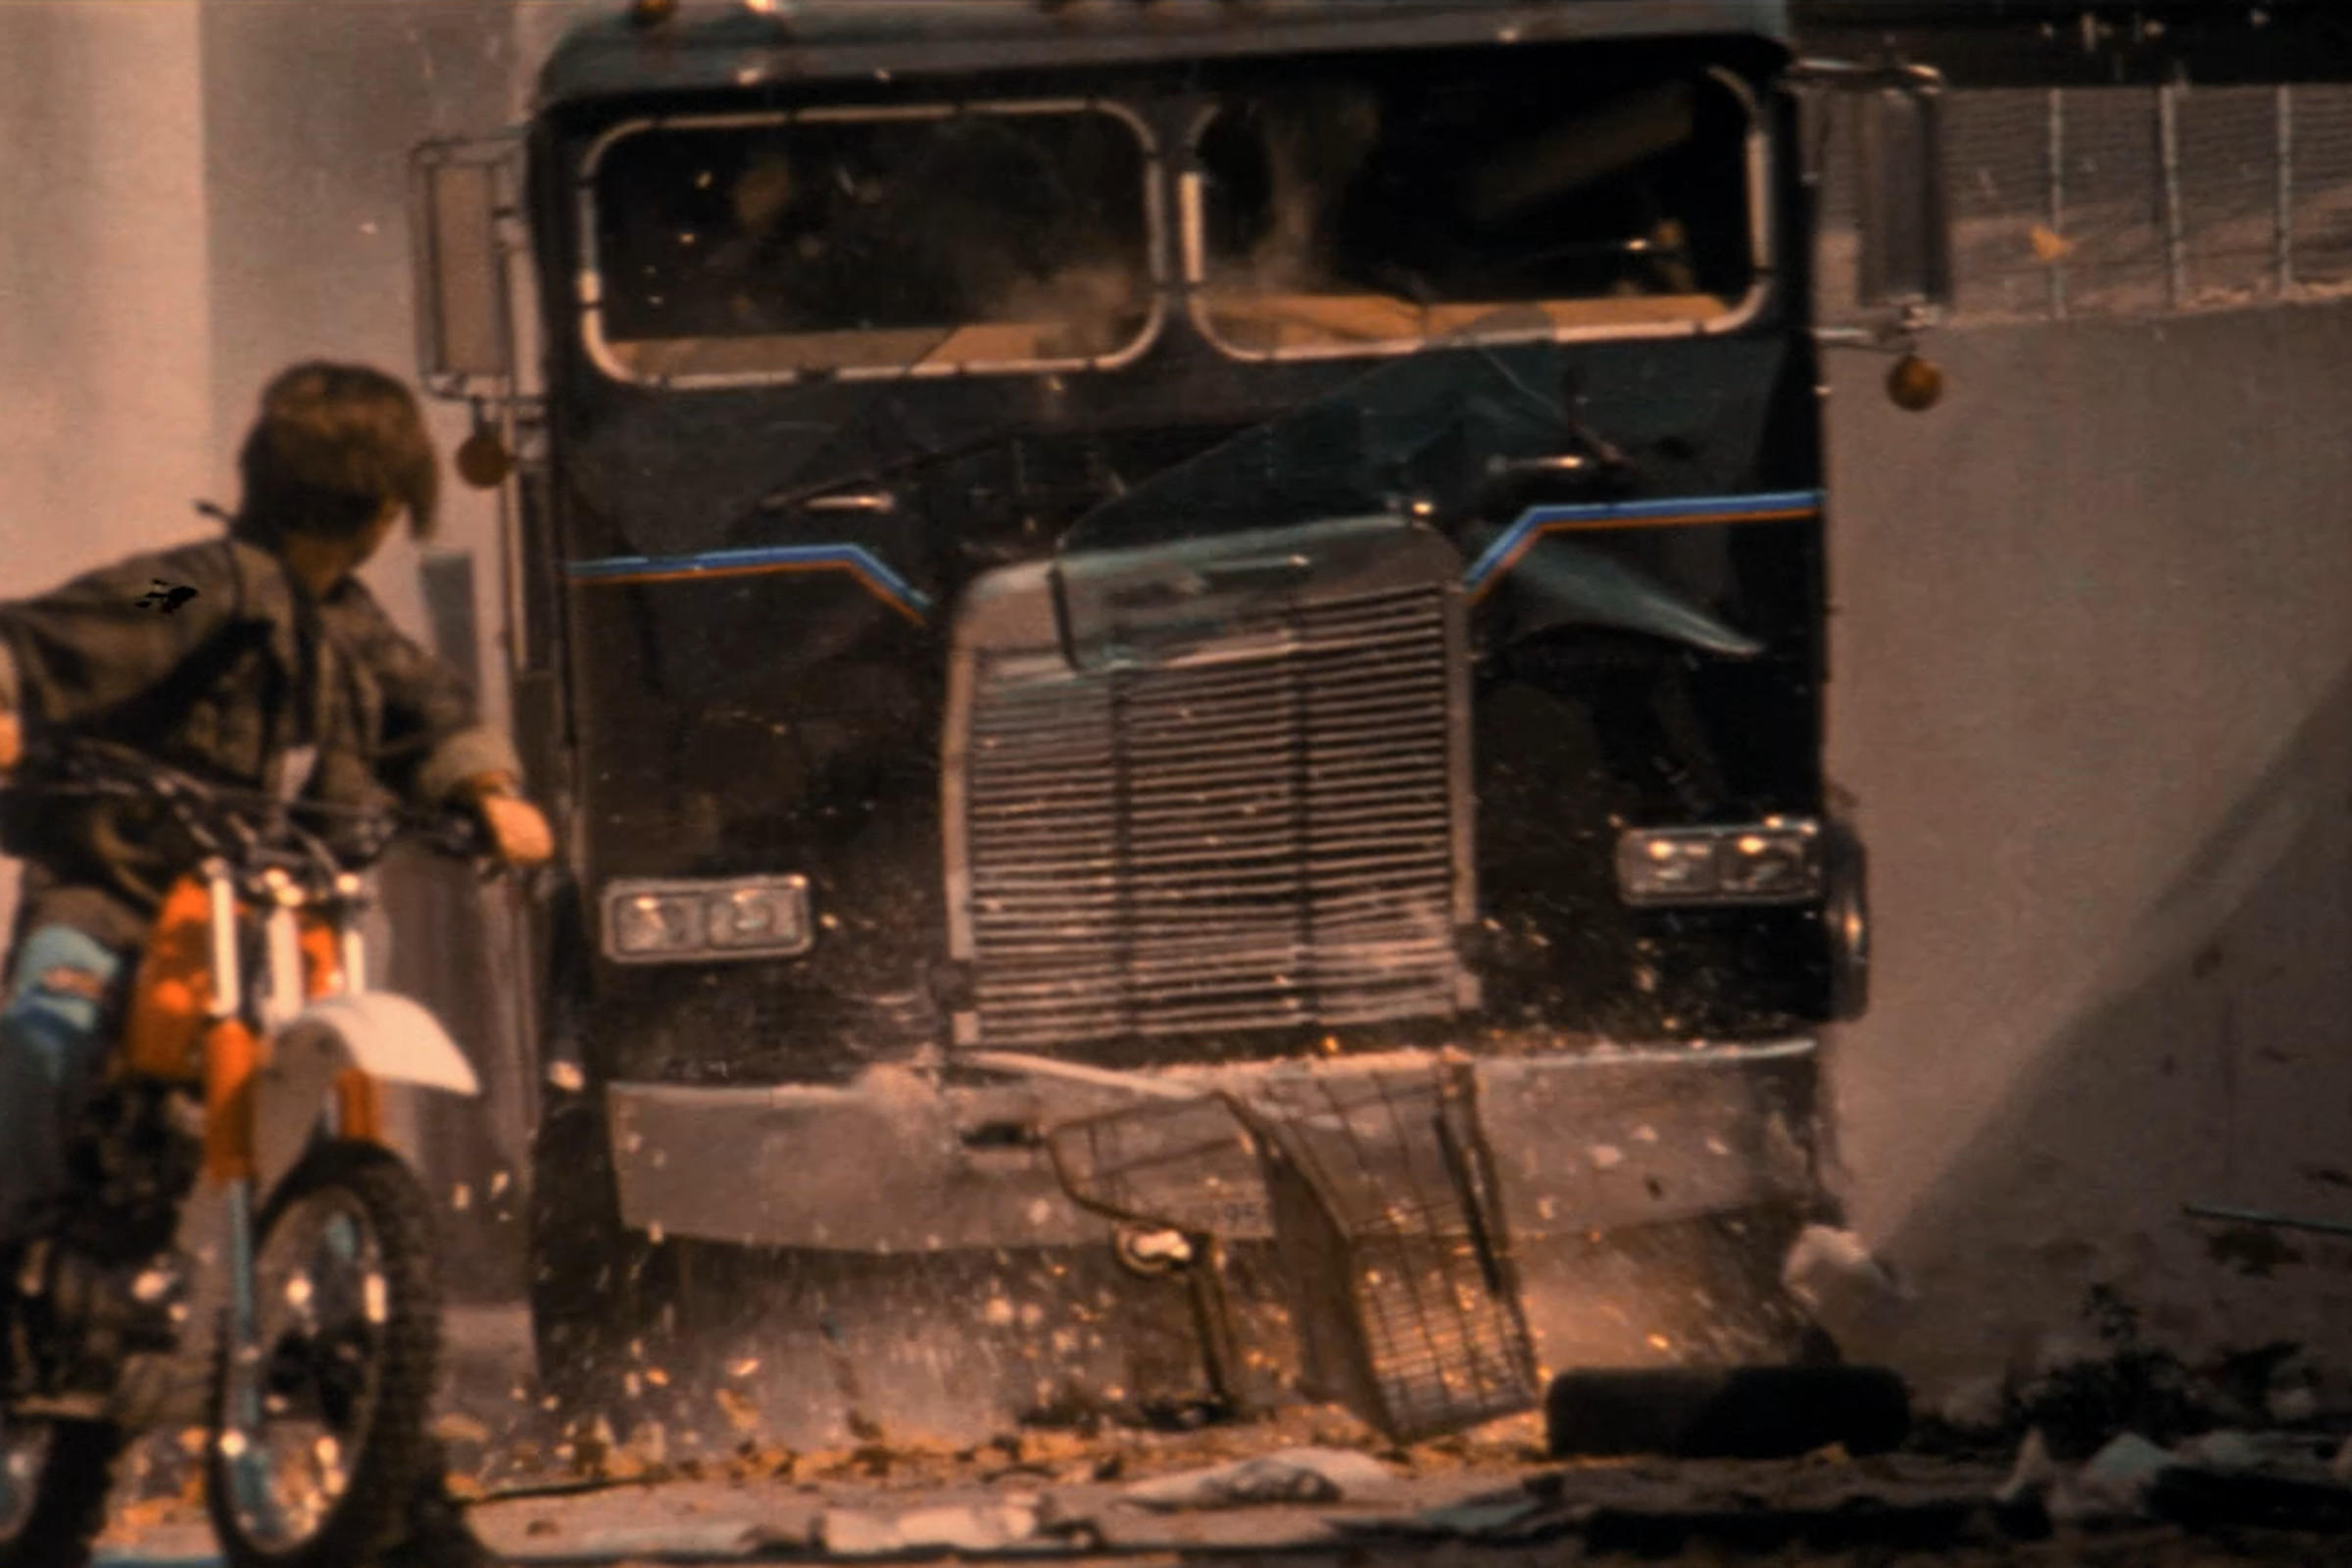 A screenshot from Terminator 2 showing a person on a dirtbike in the foreground and a flat-nosed semi truck in the background, approaching him.